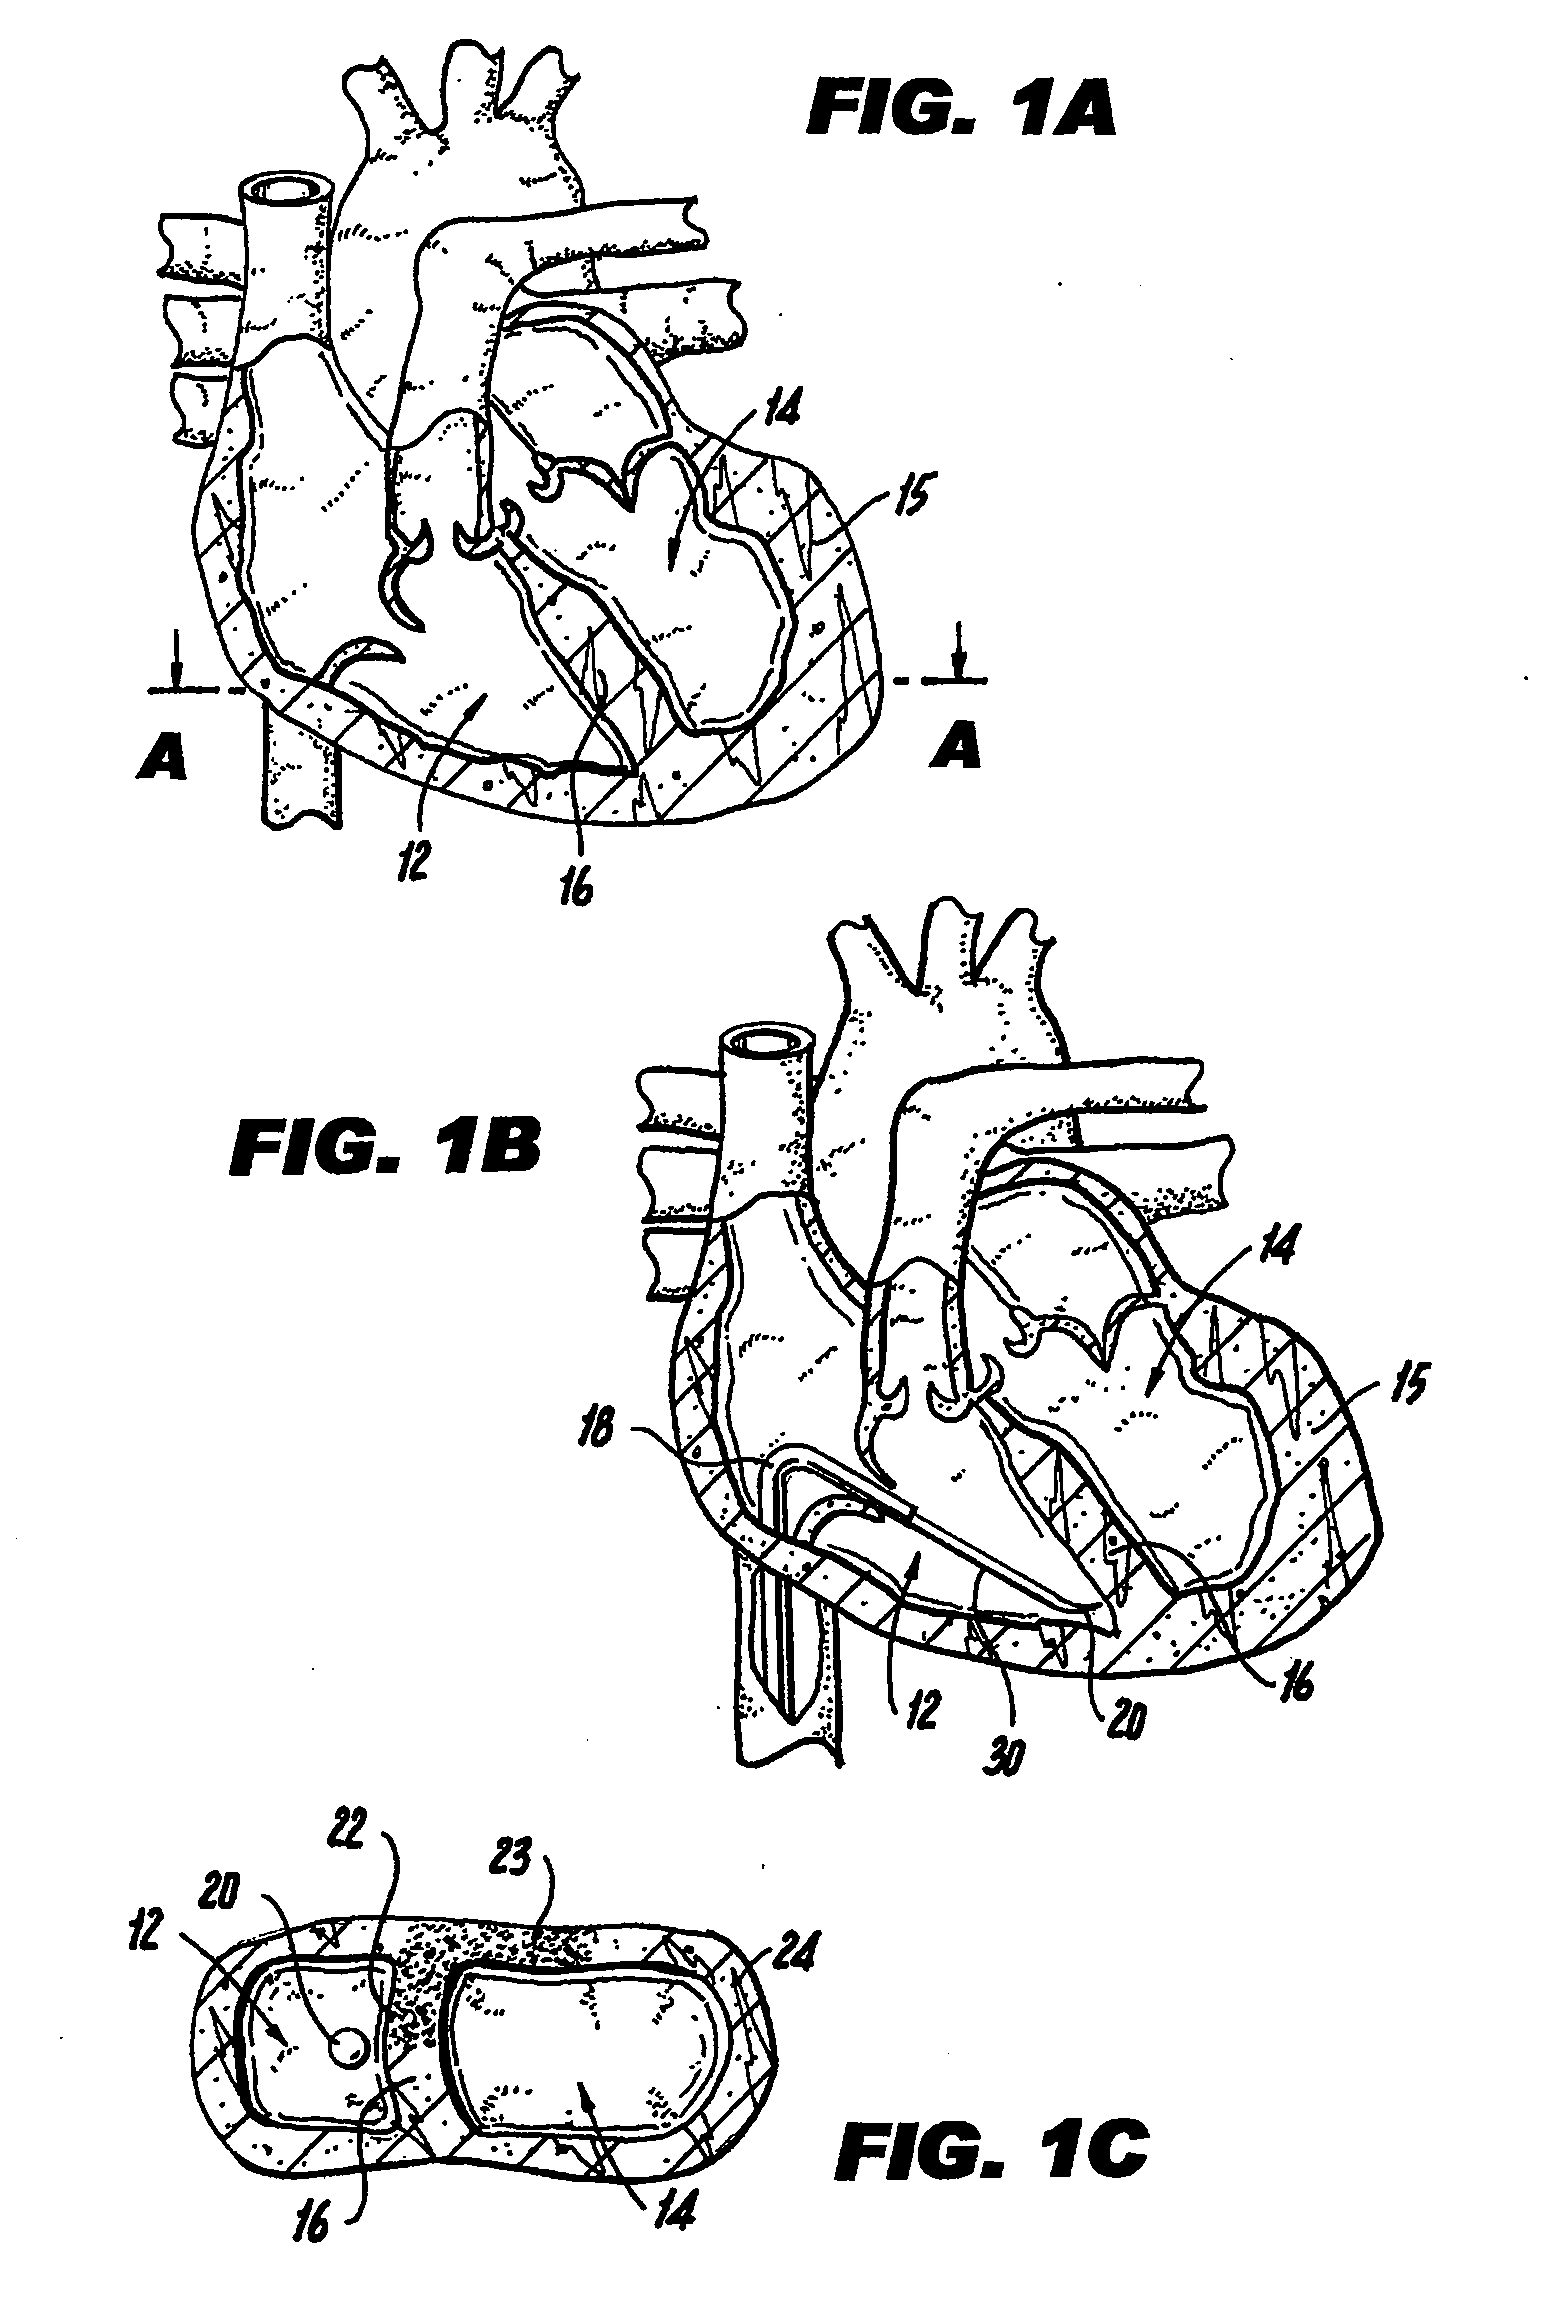 Method and device for percutaneous left ventricular reconstruction